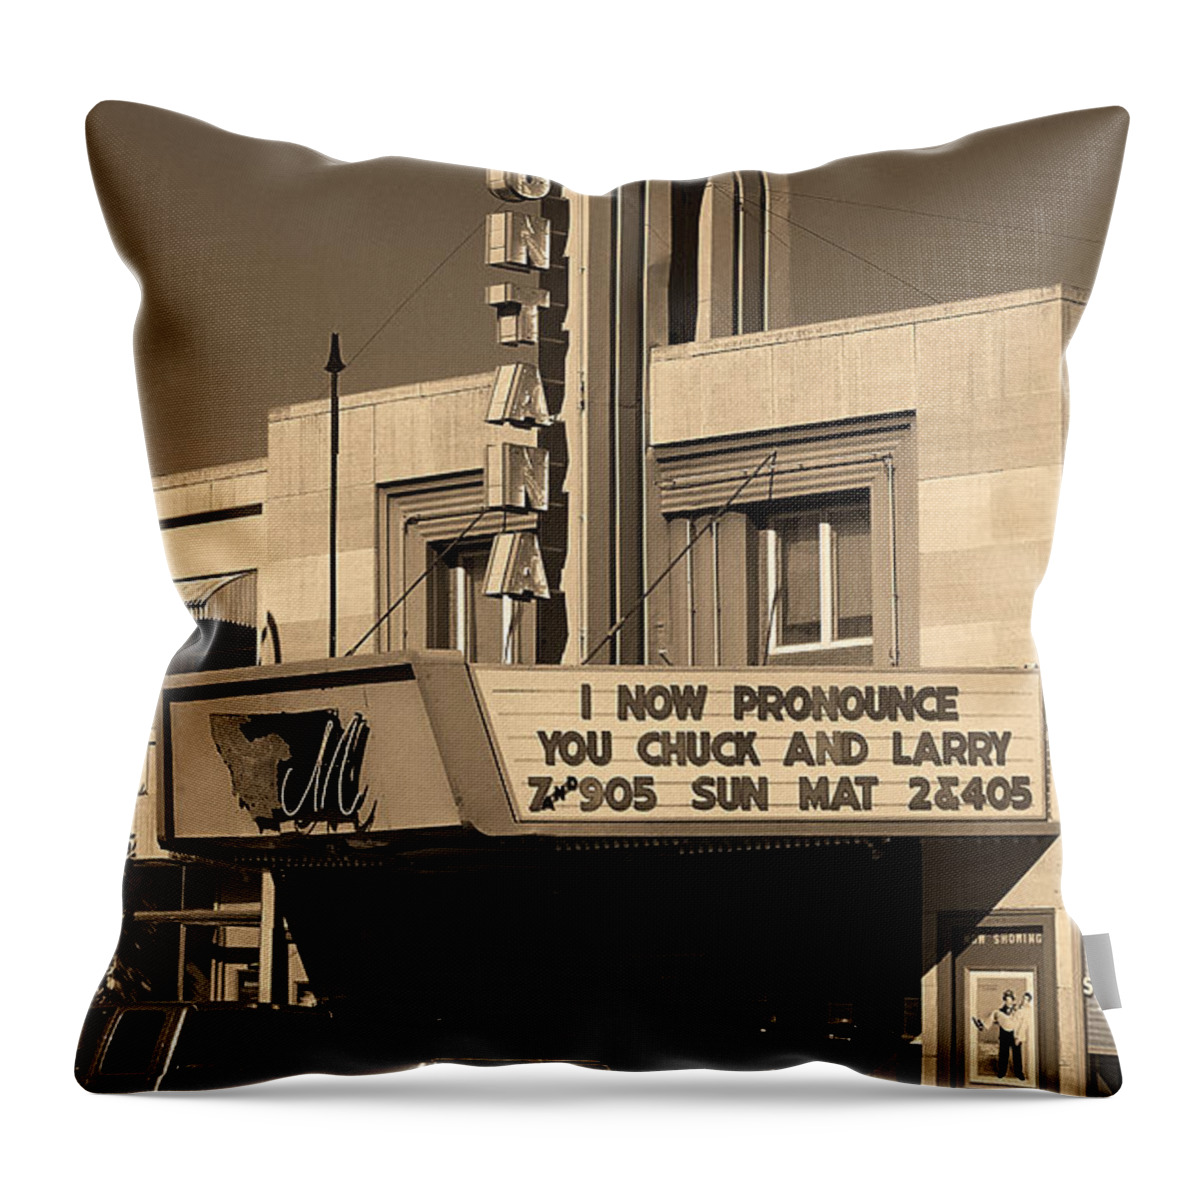 America Throw Pillow featuring the photograph Miles City, Montana - Theater Sepia by Frank Romeo